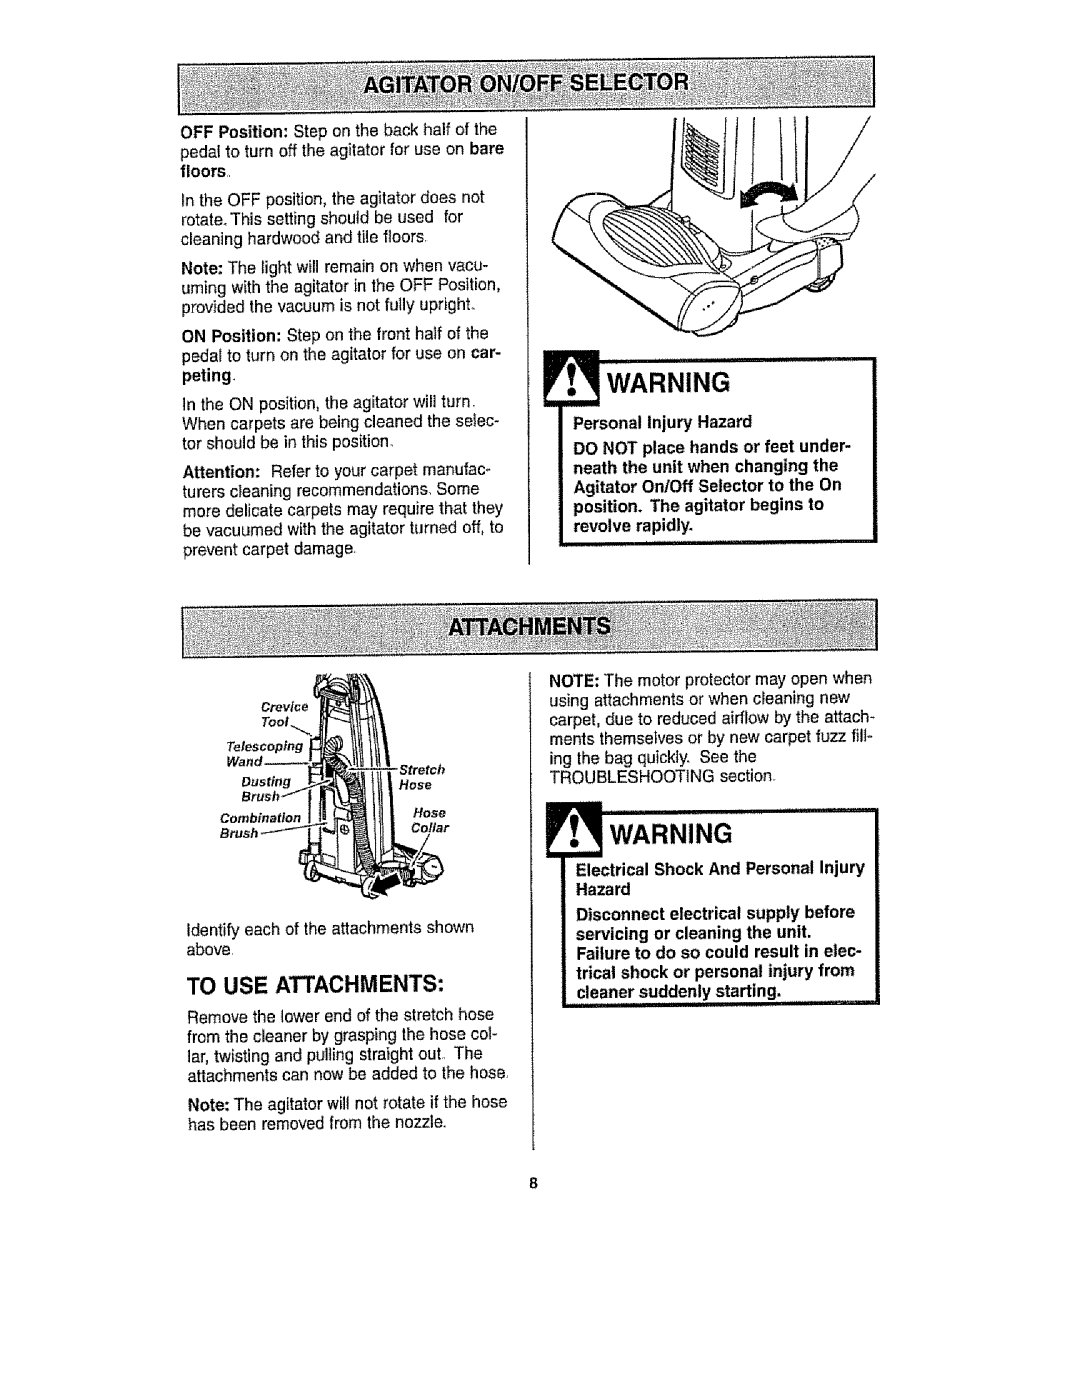 Kenmore 116.30912 manual To Use Attachments, Electrical Shock And Personal Injury Hazard, clea,n,ersuddenly starting 